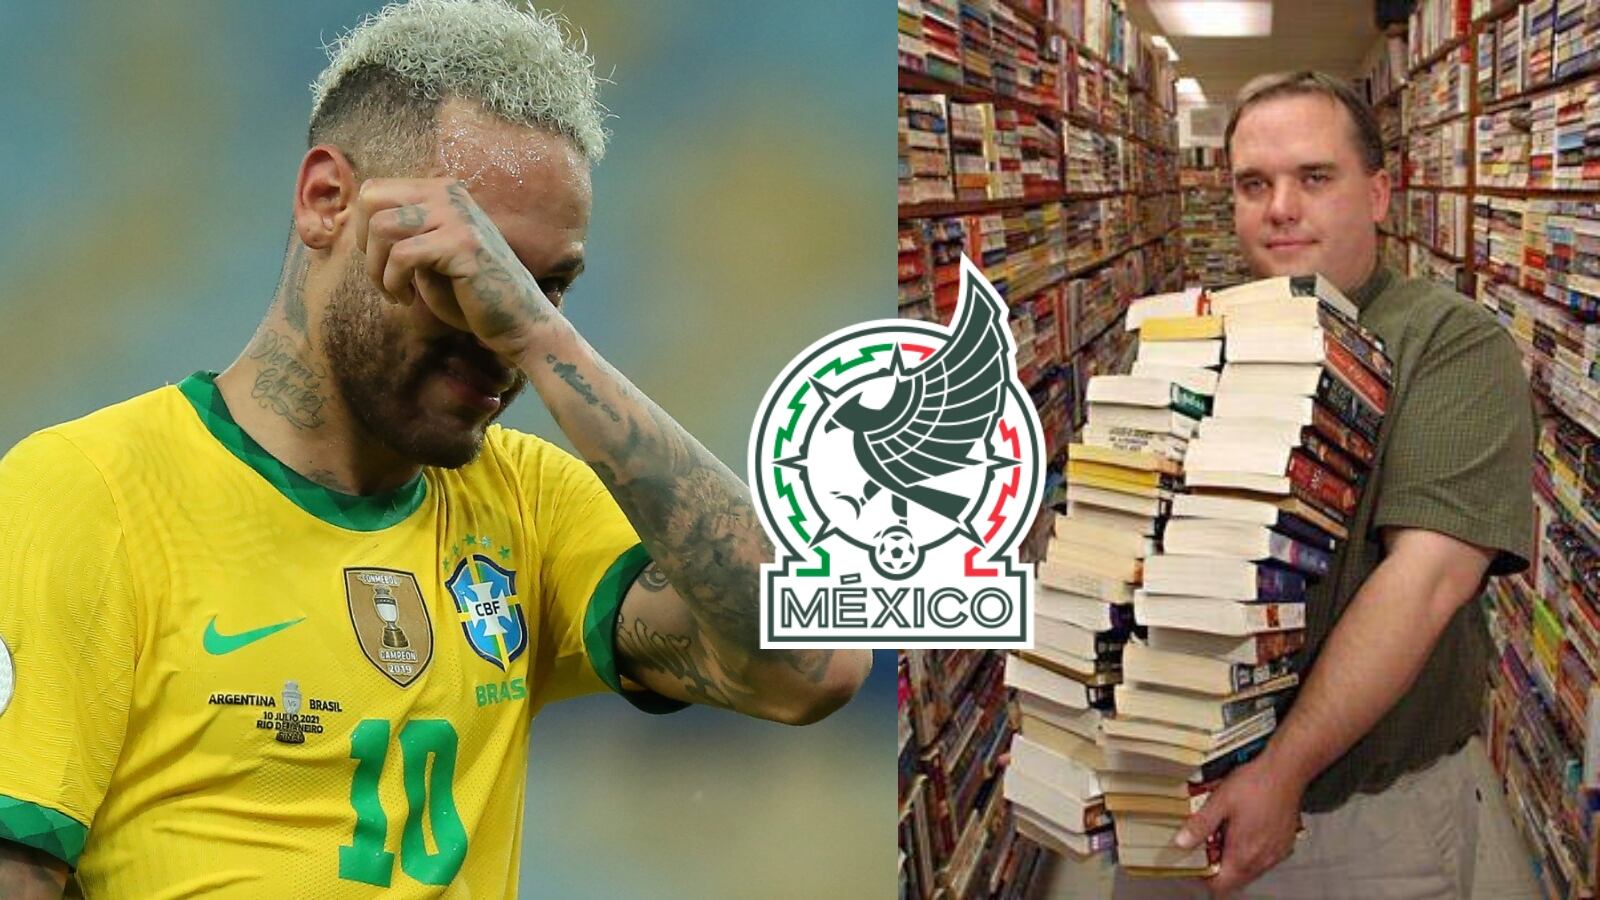 From shining against Brazil with Mexican national team, to selling books to survive